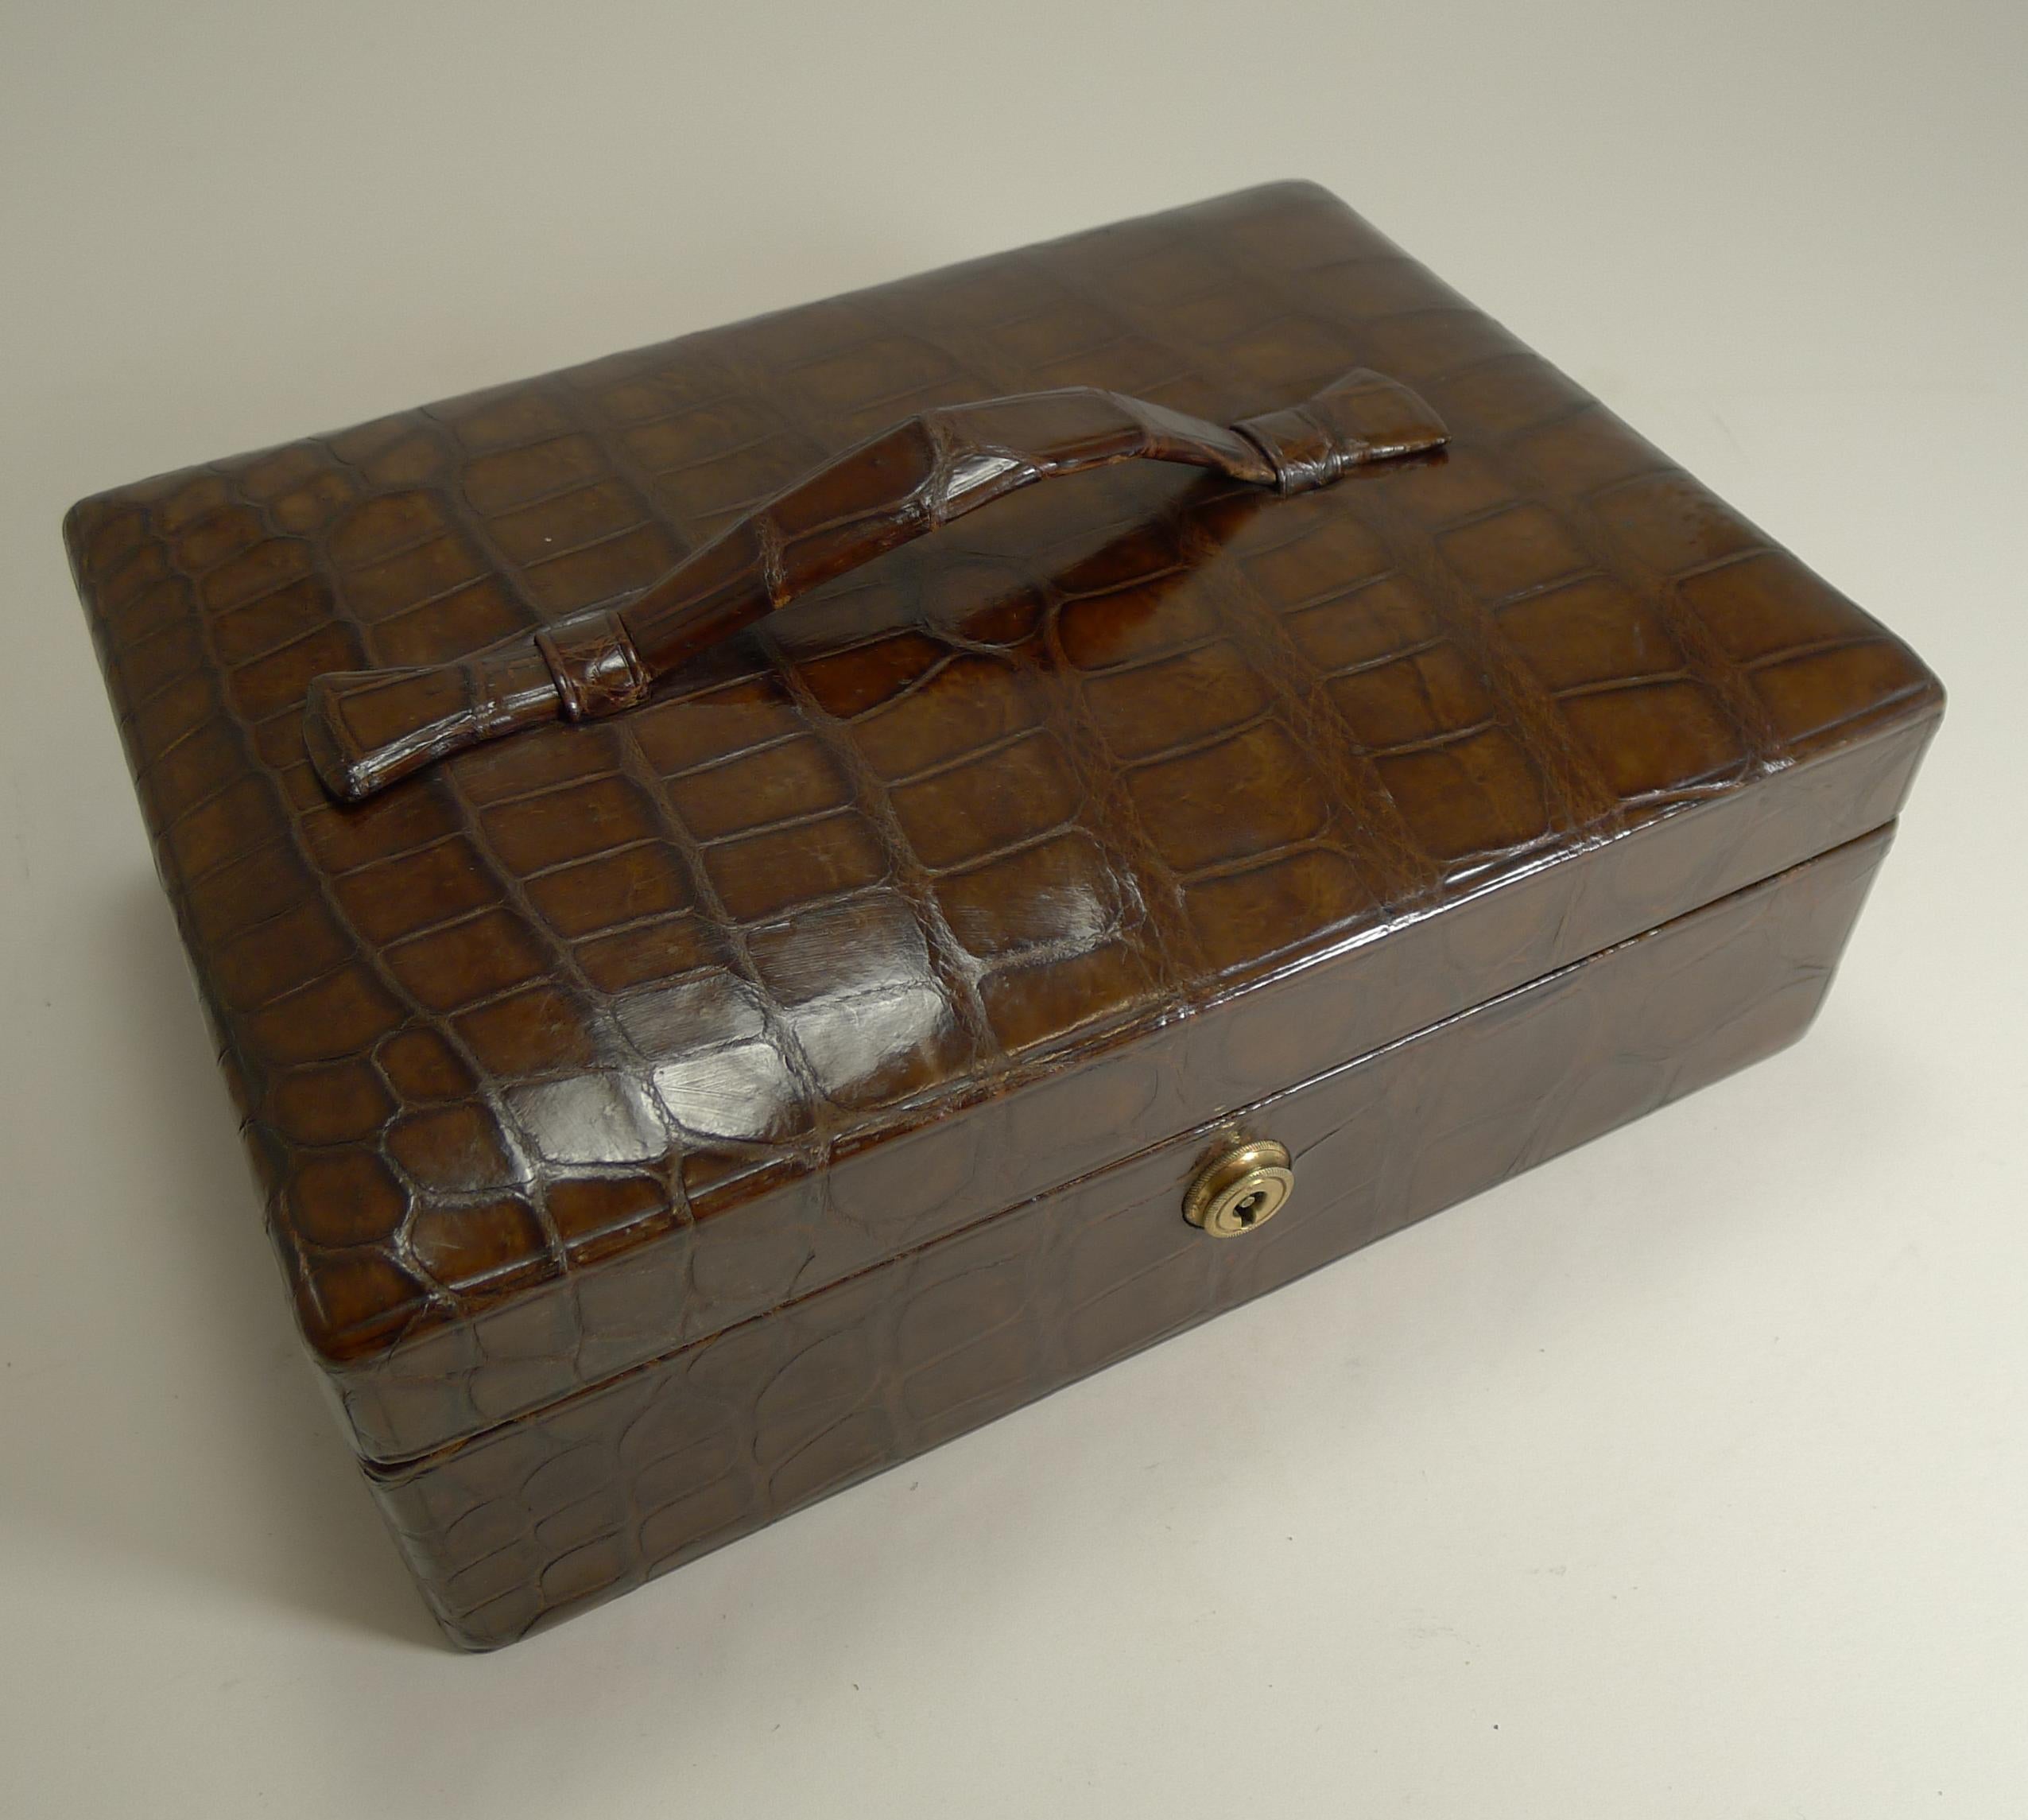 A stunning Edwardian jewellery box in a fabulous rich chocolate brown colour with an integral carrying handle to the top. The skin is in exceptional condition with a good glossy patina.

The box comes complete with a working key to lock and unlock